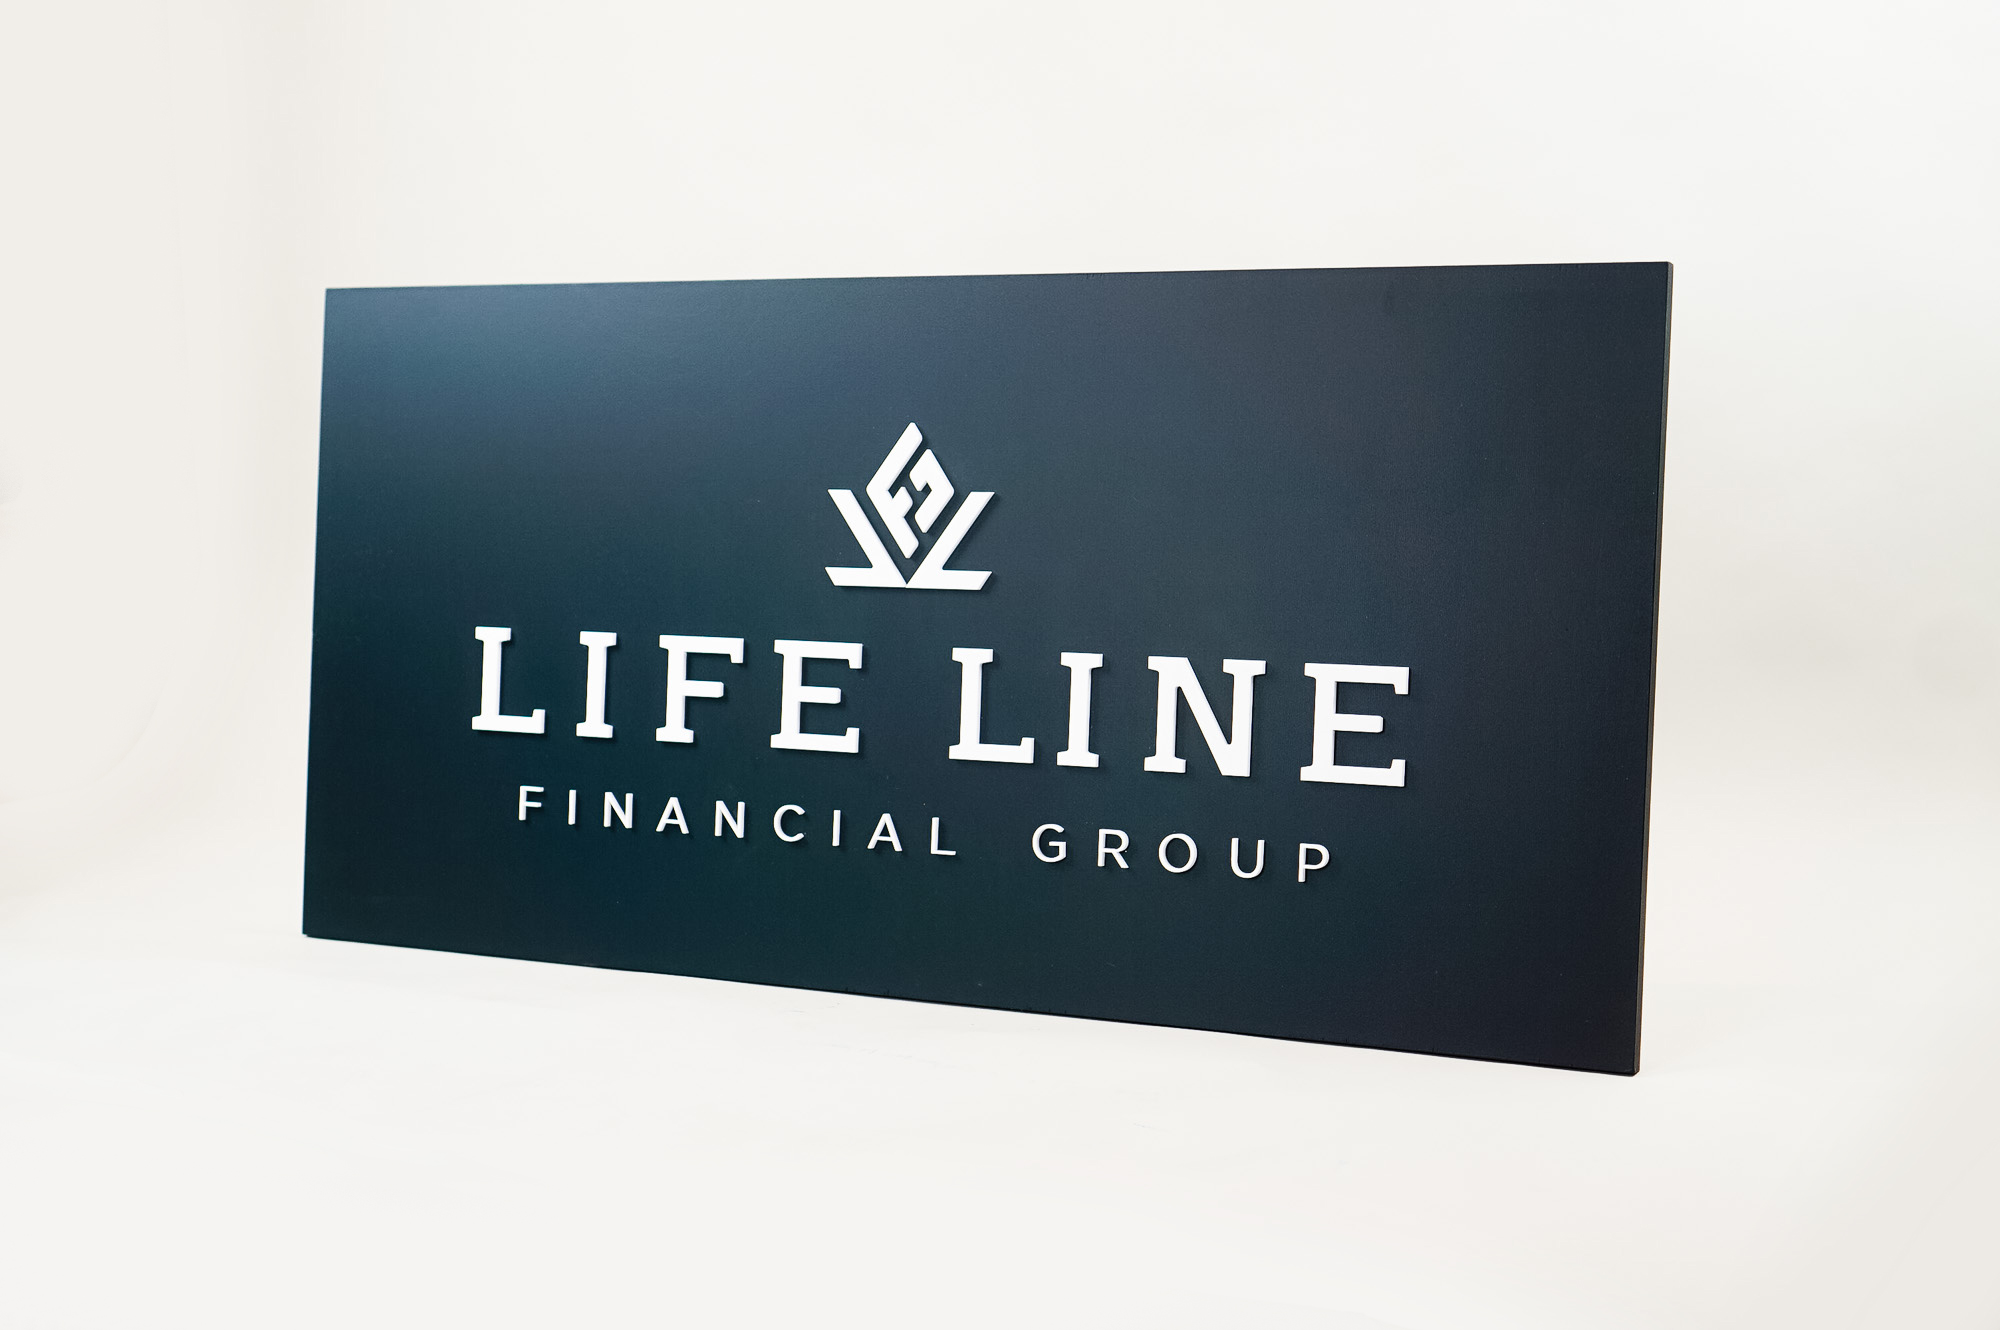 Raised dark navy blue raised sign with white lettering for Life Line Financial Group, a multi-family office with a dedicated team of Certified Financial Planners